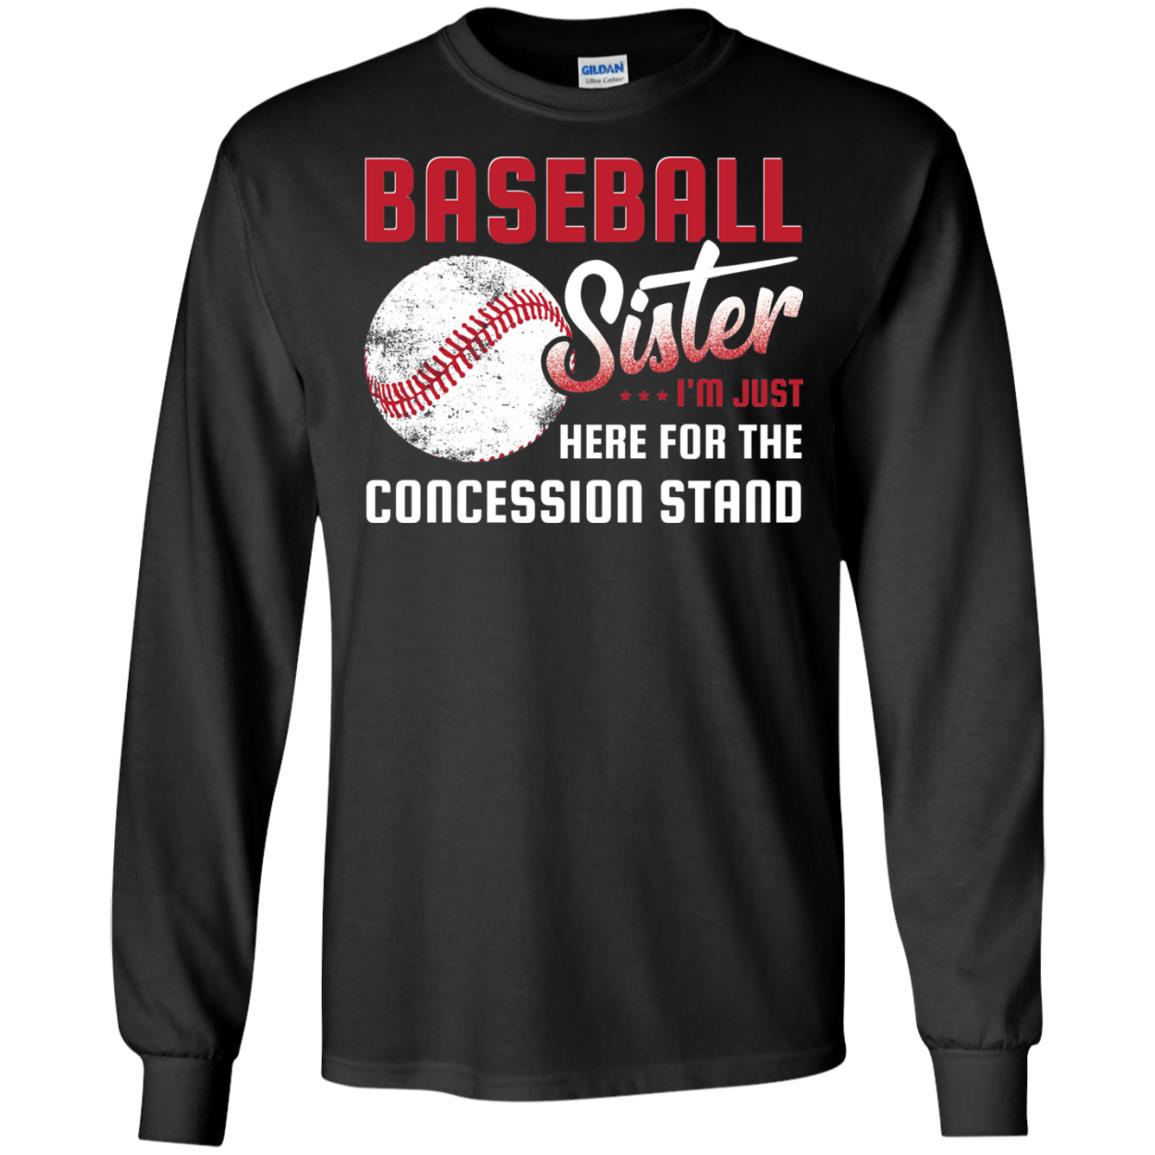 Baseball Sister Shirt Im Just Here For Concession Stand